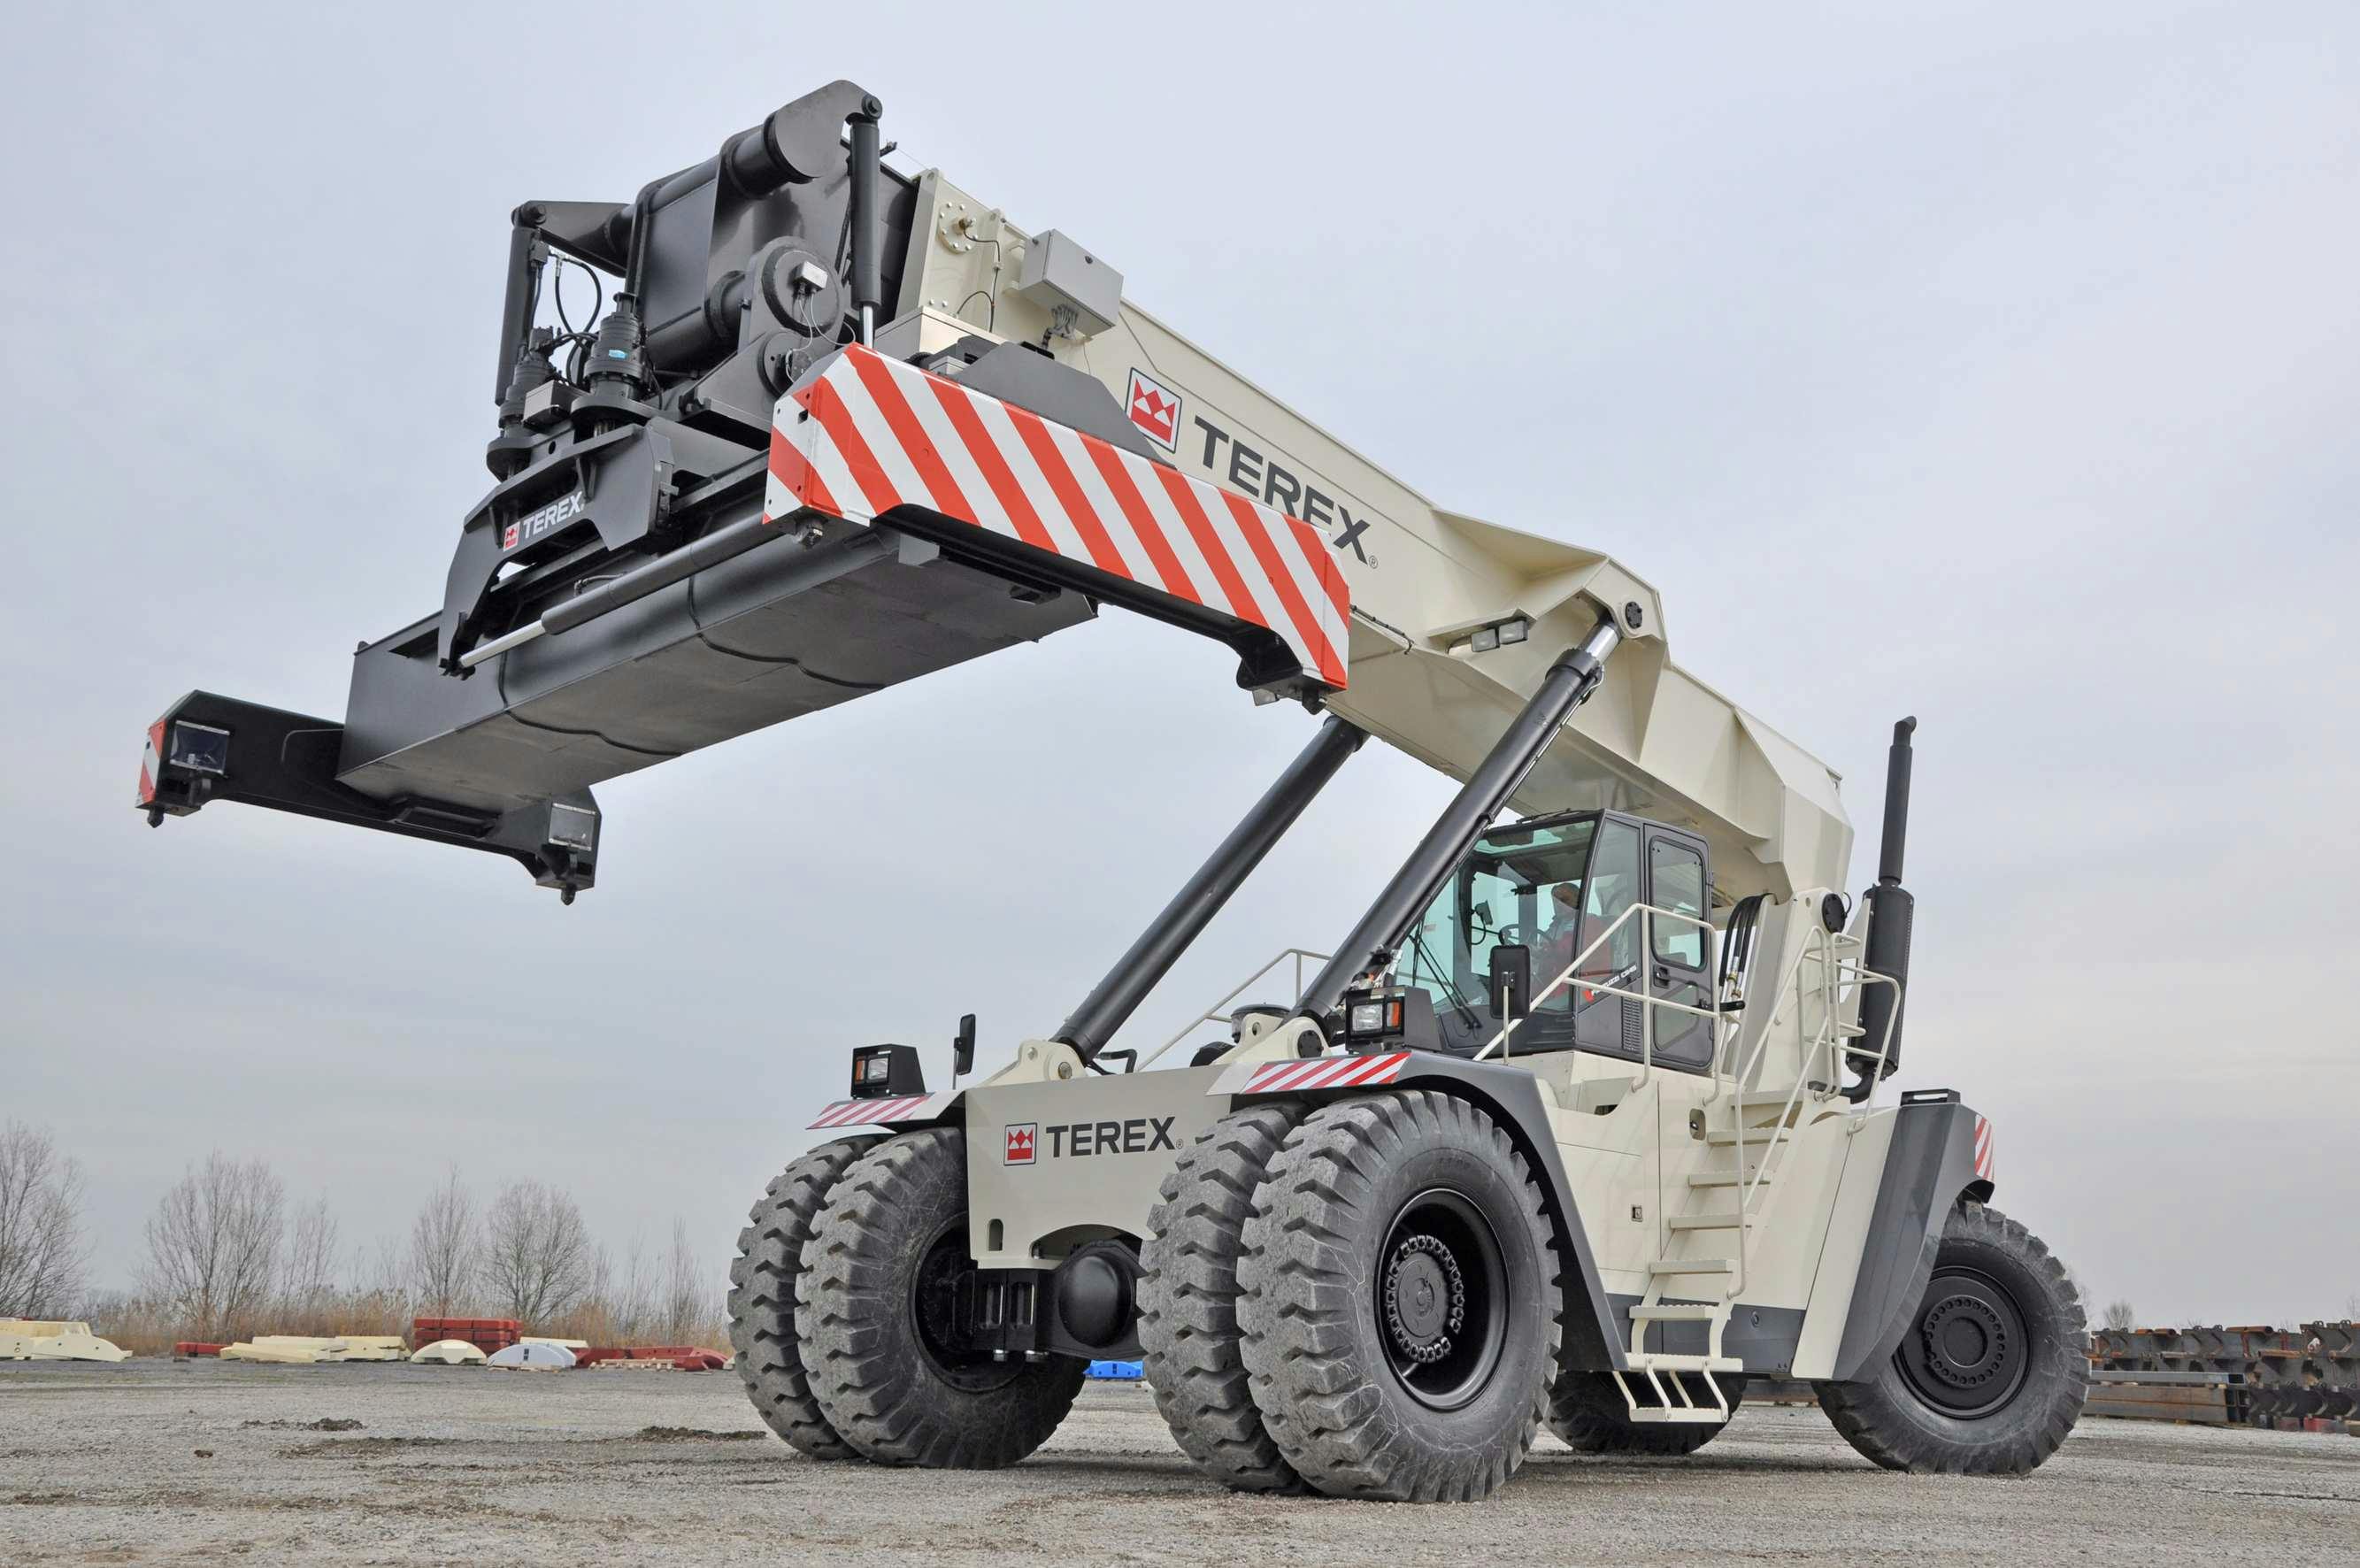 Terex Delivers 100th Reach Stacker Built in Italy